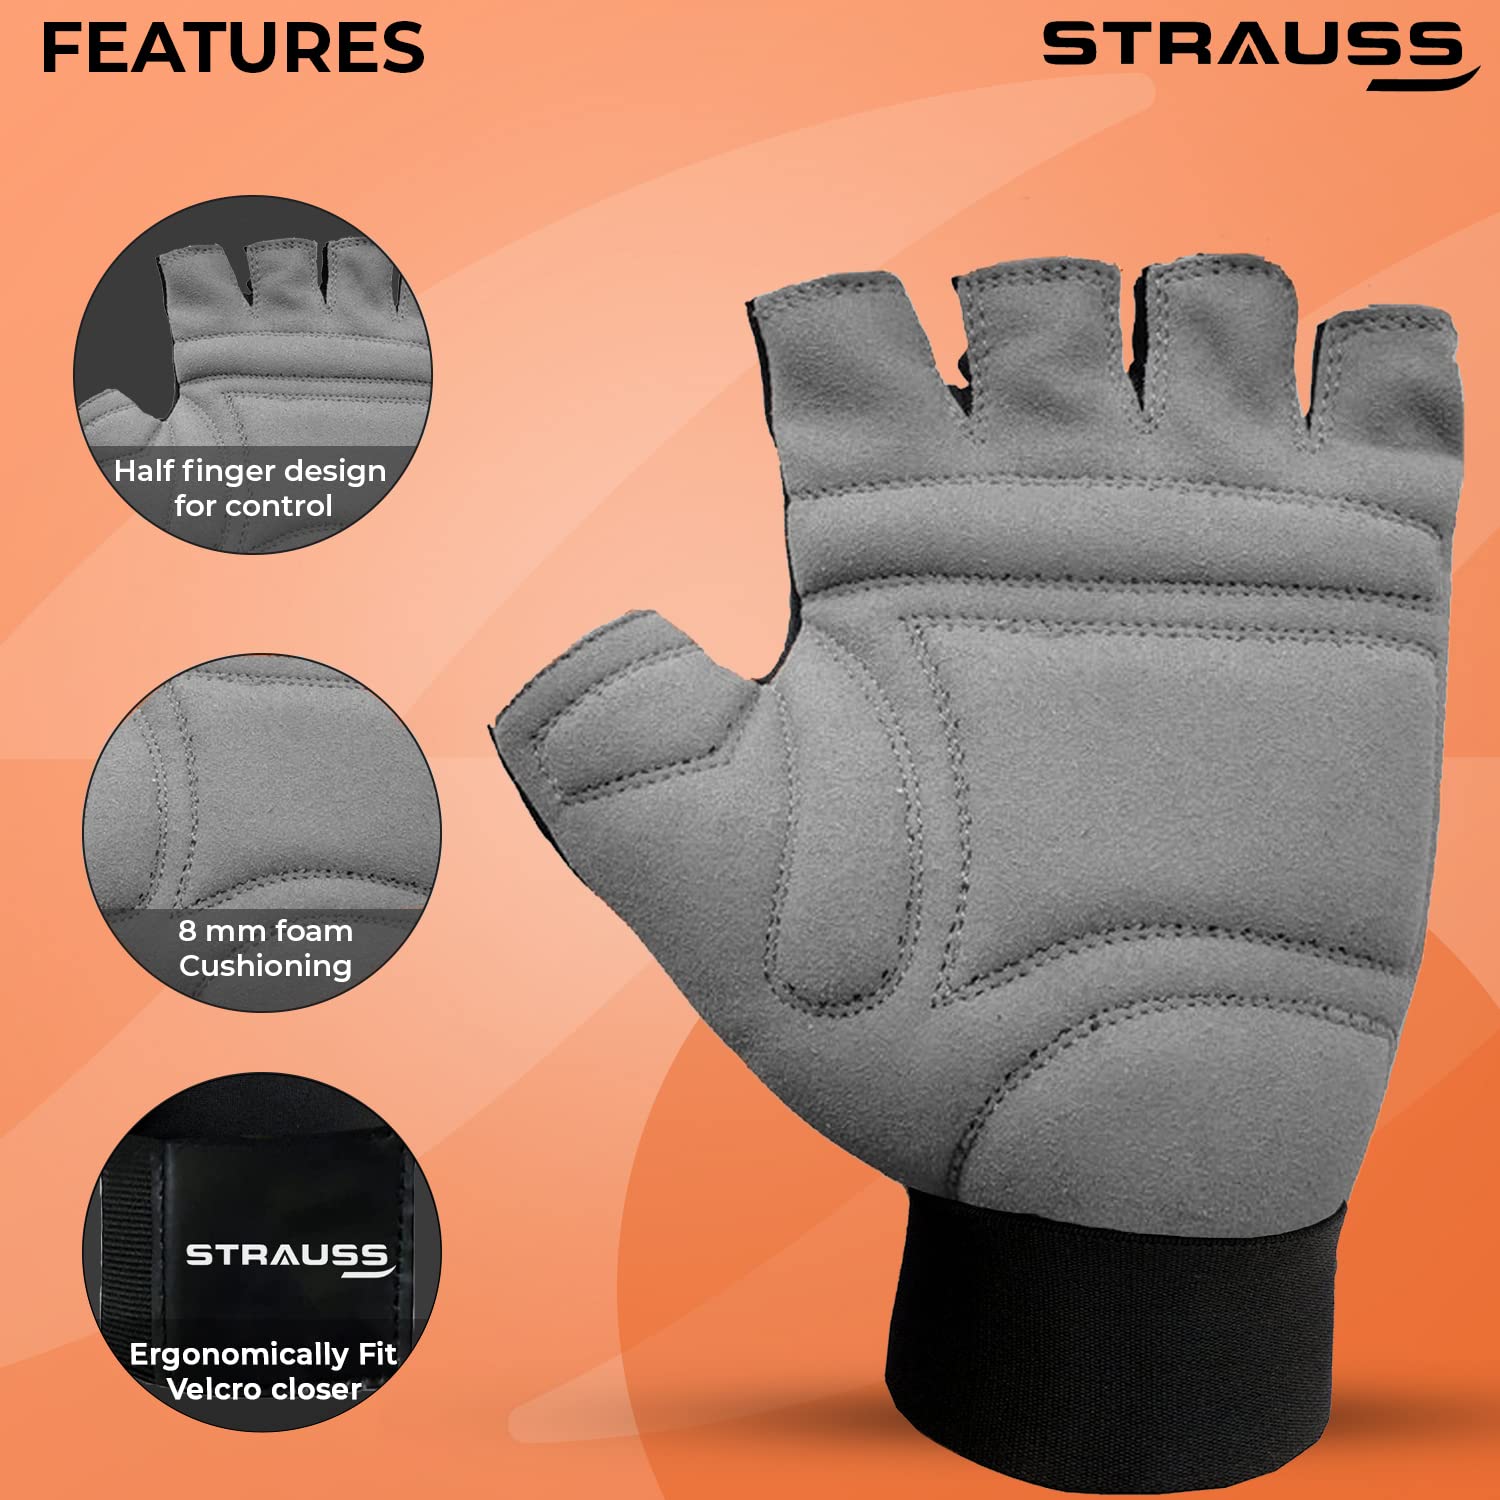 STRAUSS Suede Gym Gloves for Weightlifting, Training, Cycling, Exercise & Gym | Half Finger Design, 8mm Foam Cushioning, Anti-Slip & Breathable Lycra Material, (Grey/Black), (Large)